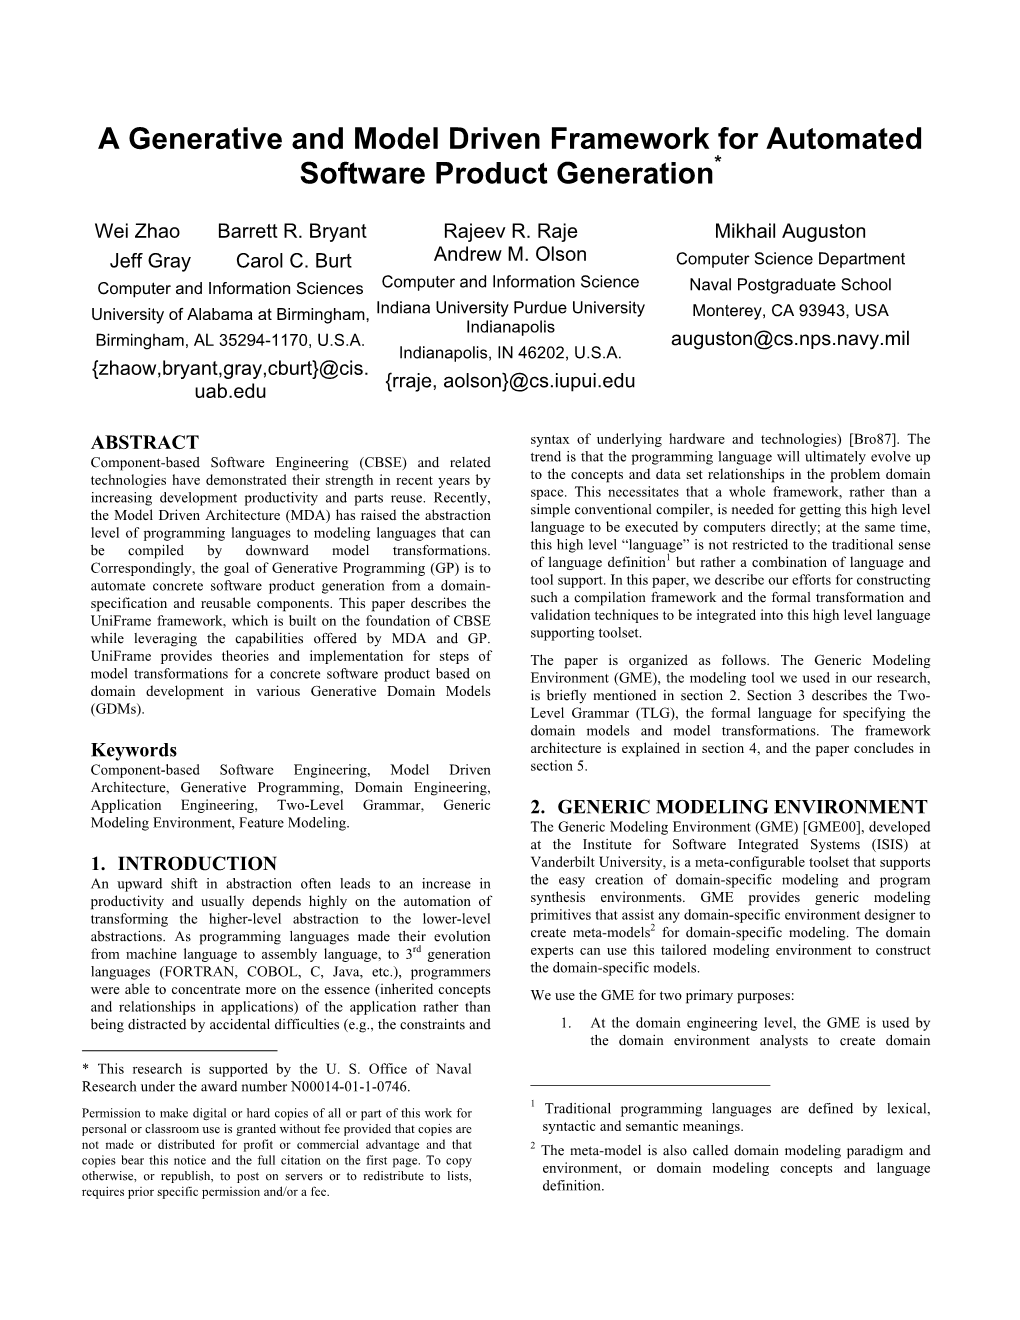 A Generative and Model Driven Framework for Automated Software Product Generation*